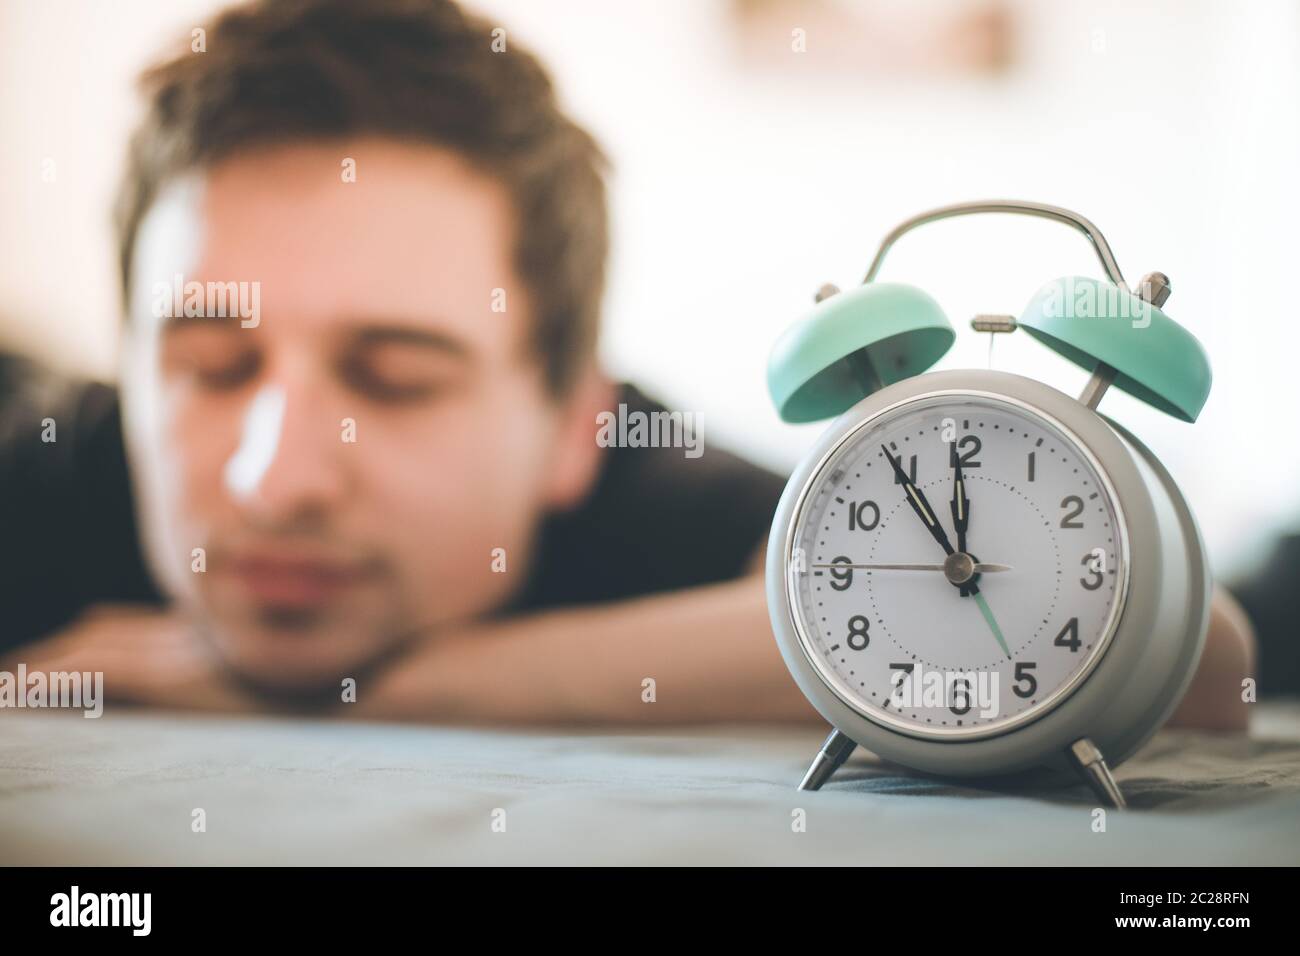 Alarm clock in the morning. Young man sleeps in the blurry background. Stock Photo